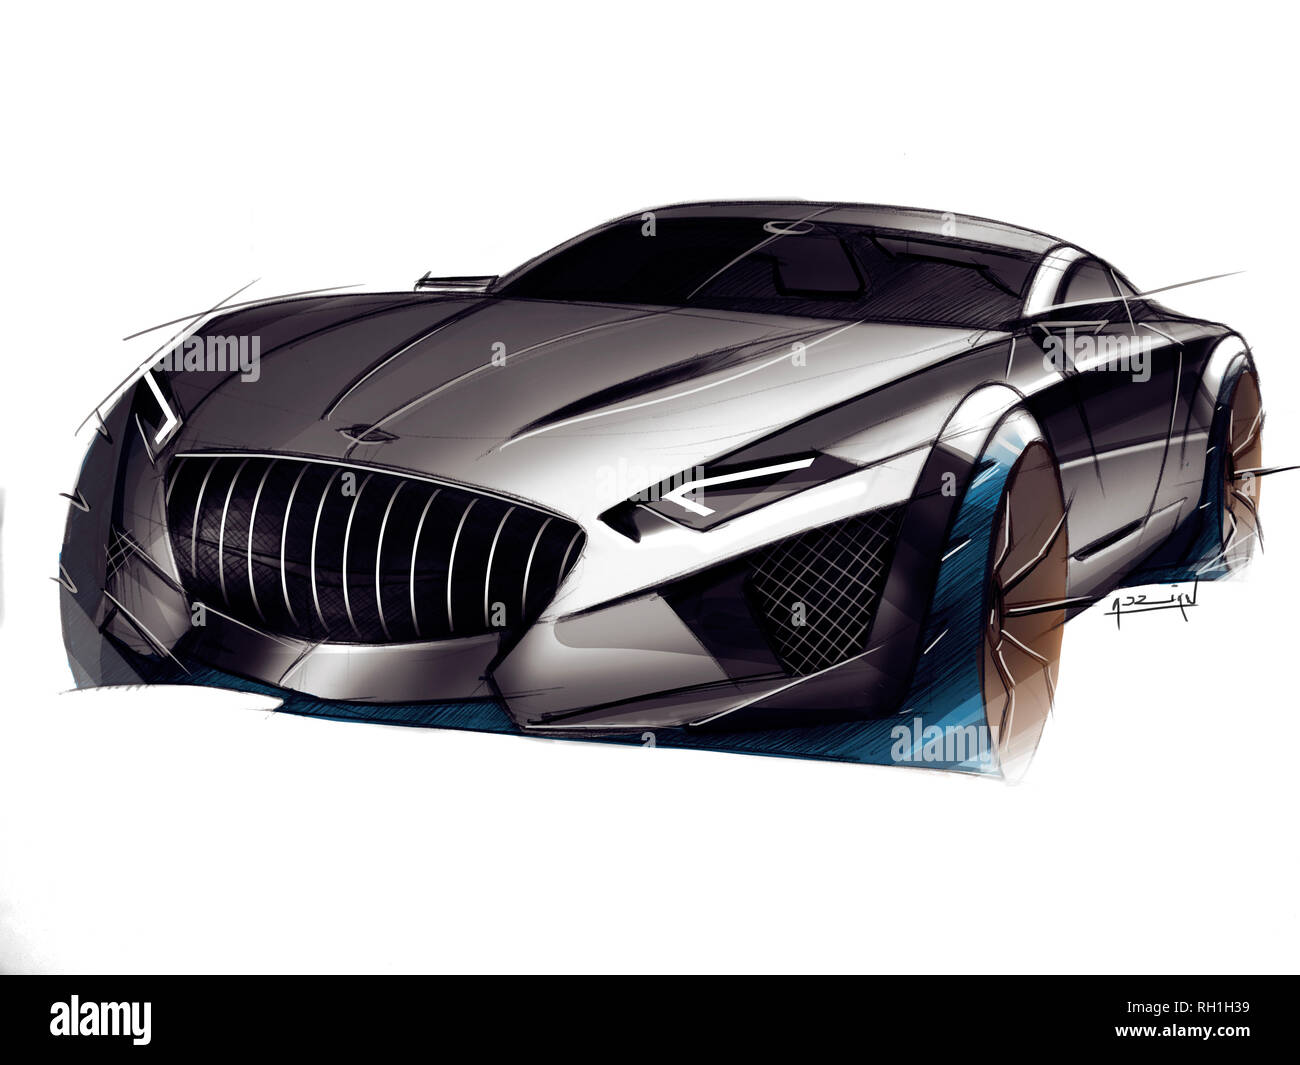 Sports car concept design drawing Stock Photo - Alamy